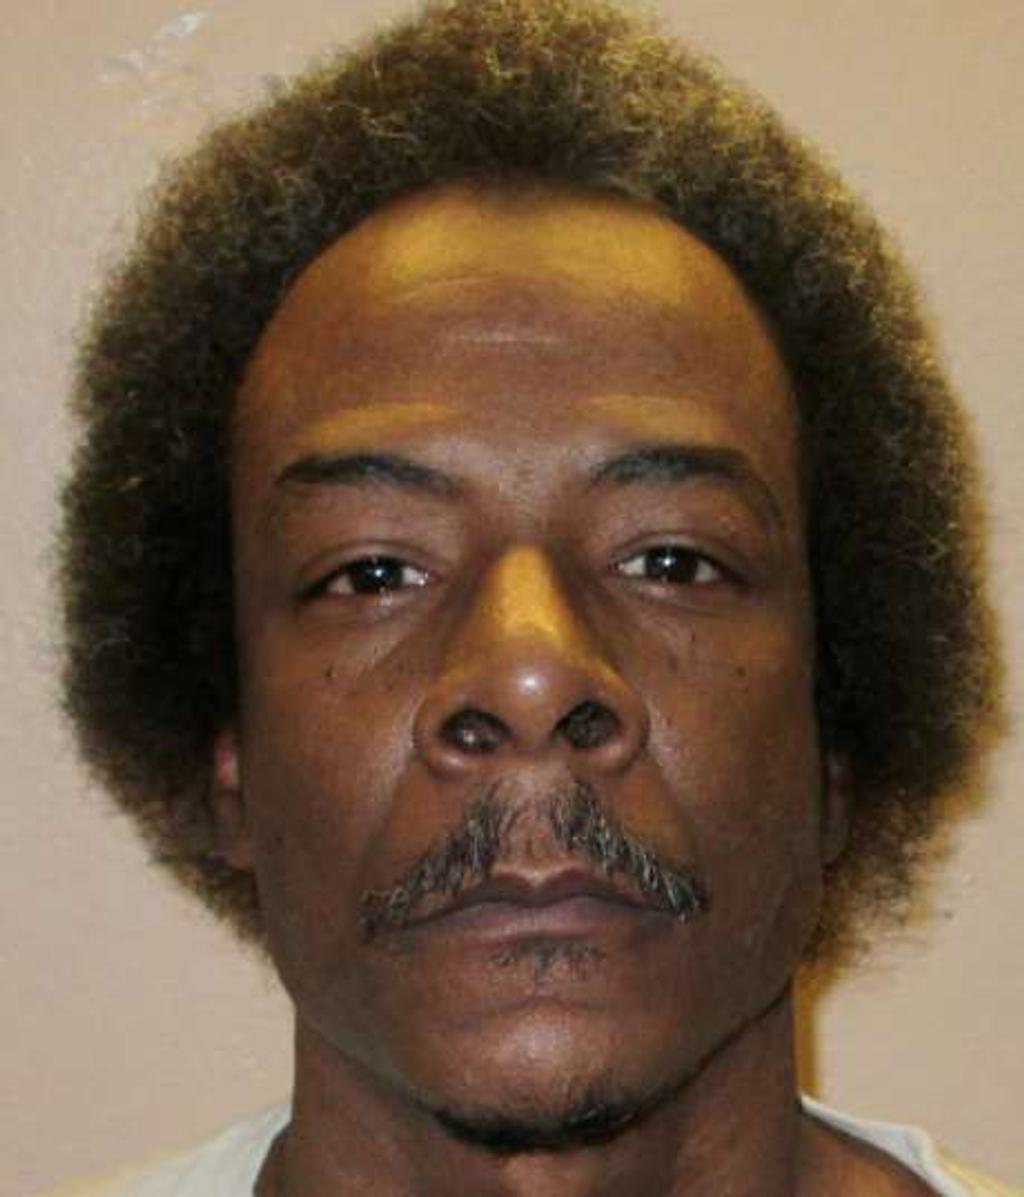 Alabama Prosecutors Join Motion to Resentence Death-Row Prisoner With 48 IQ to Life Without Parole